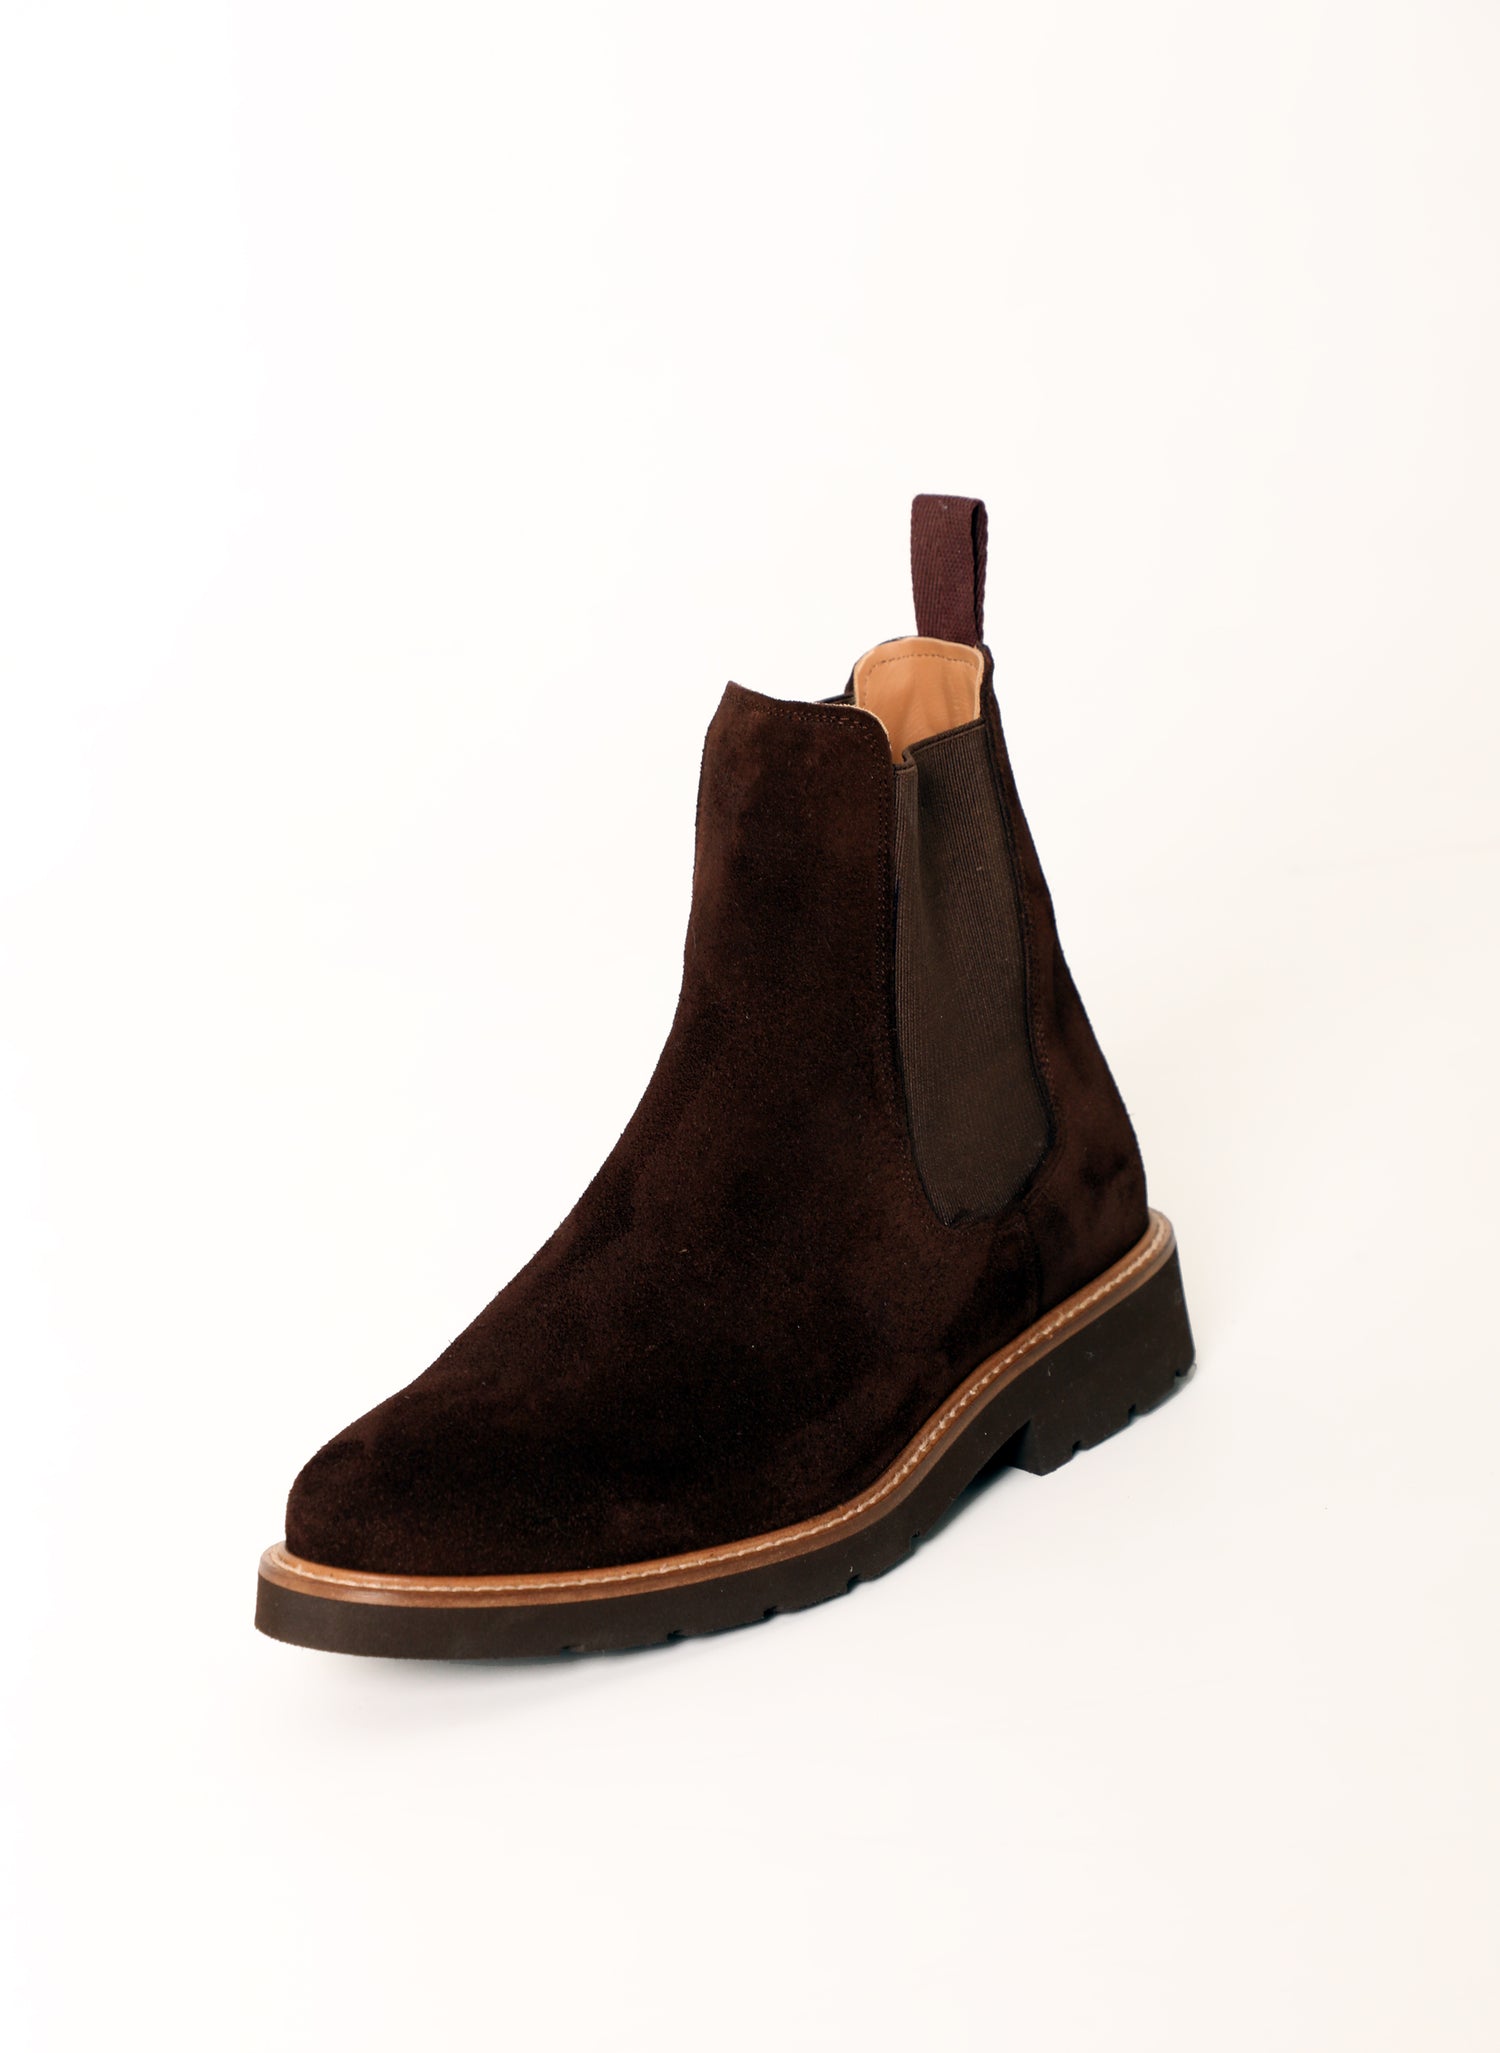 Women's Brown Suede Ankle Boots Eva Sole